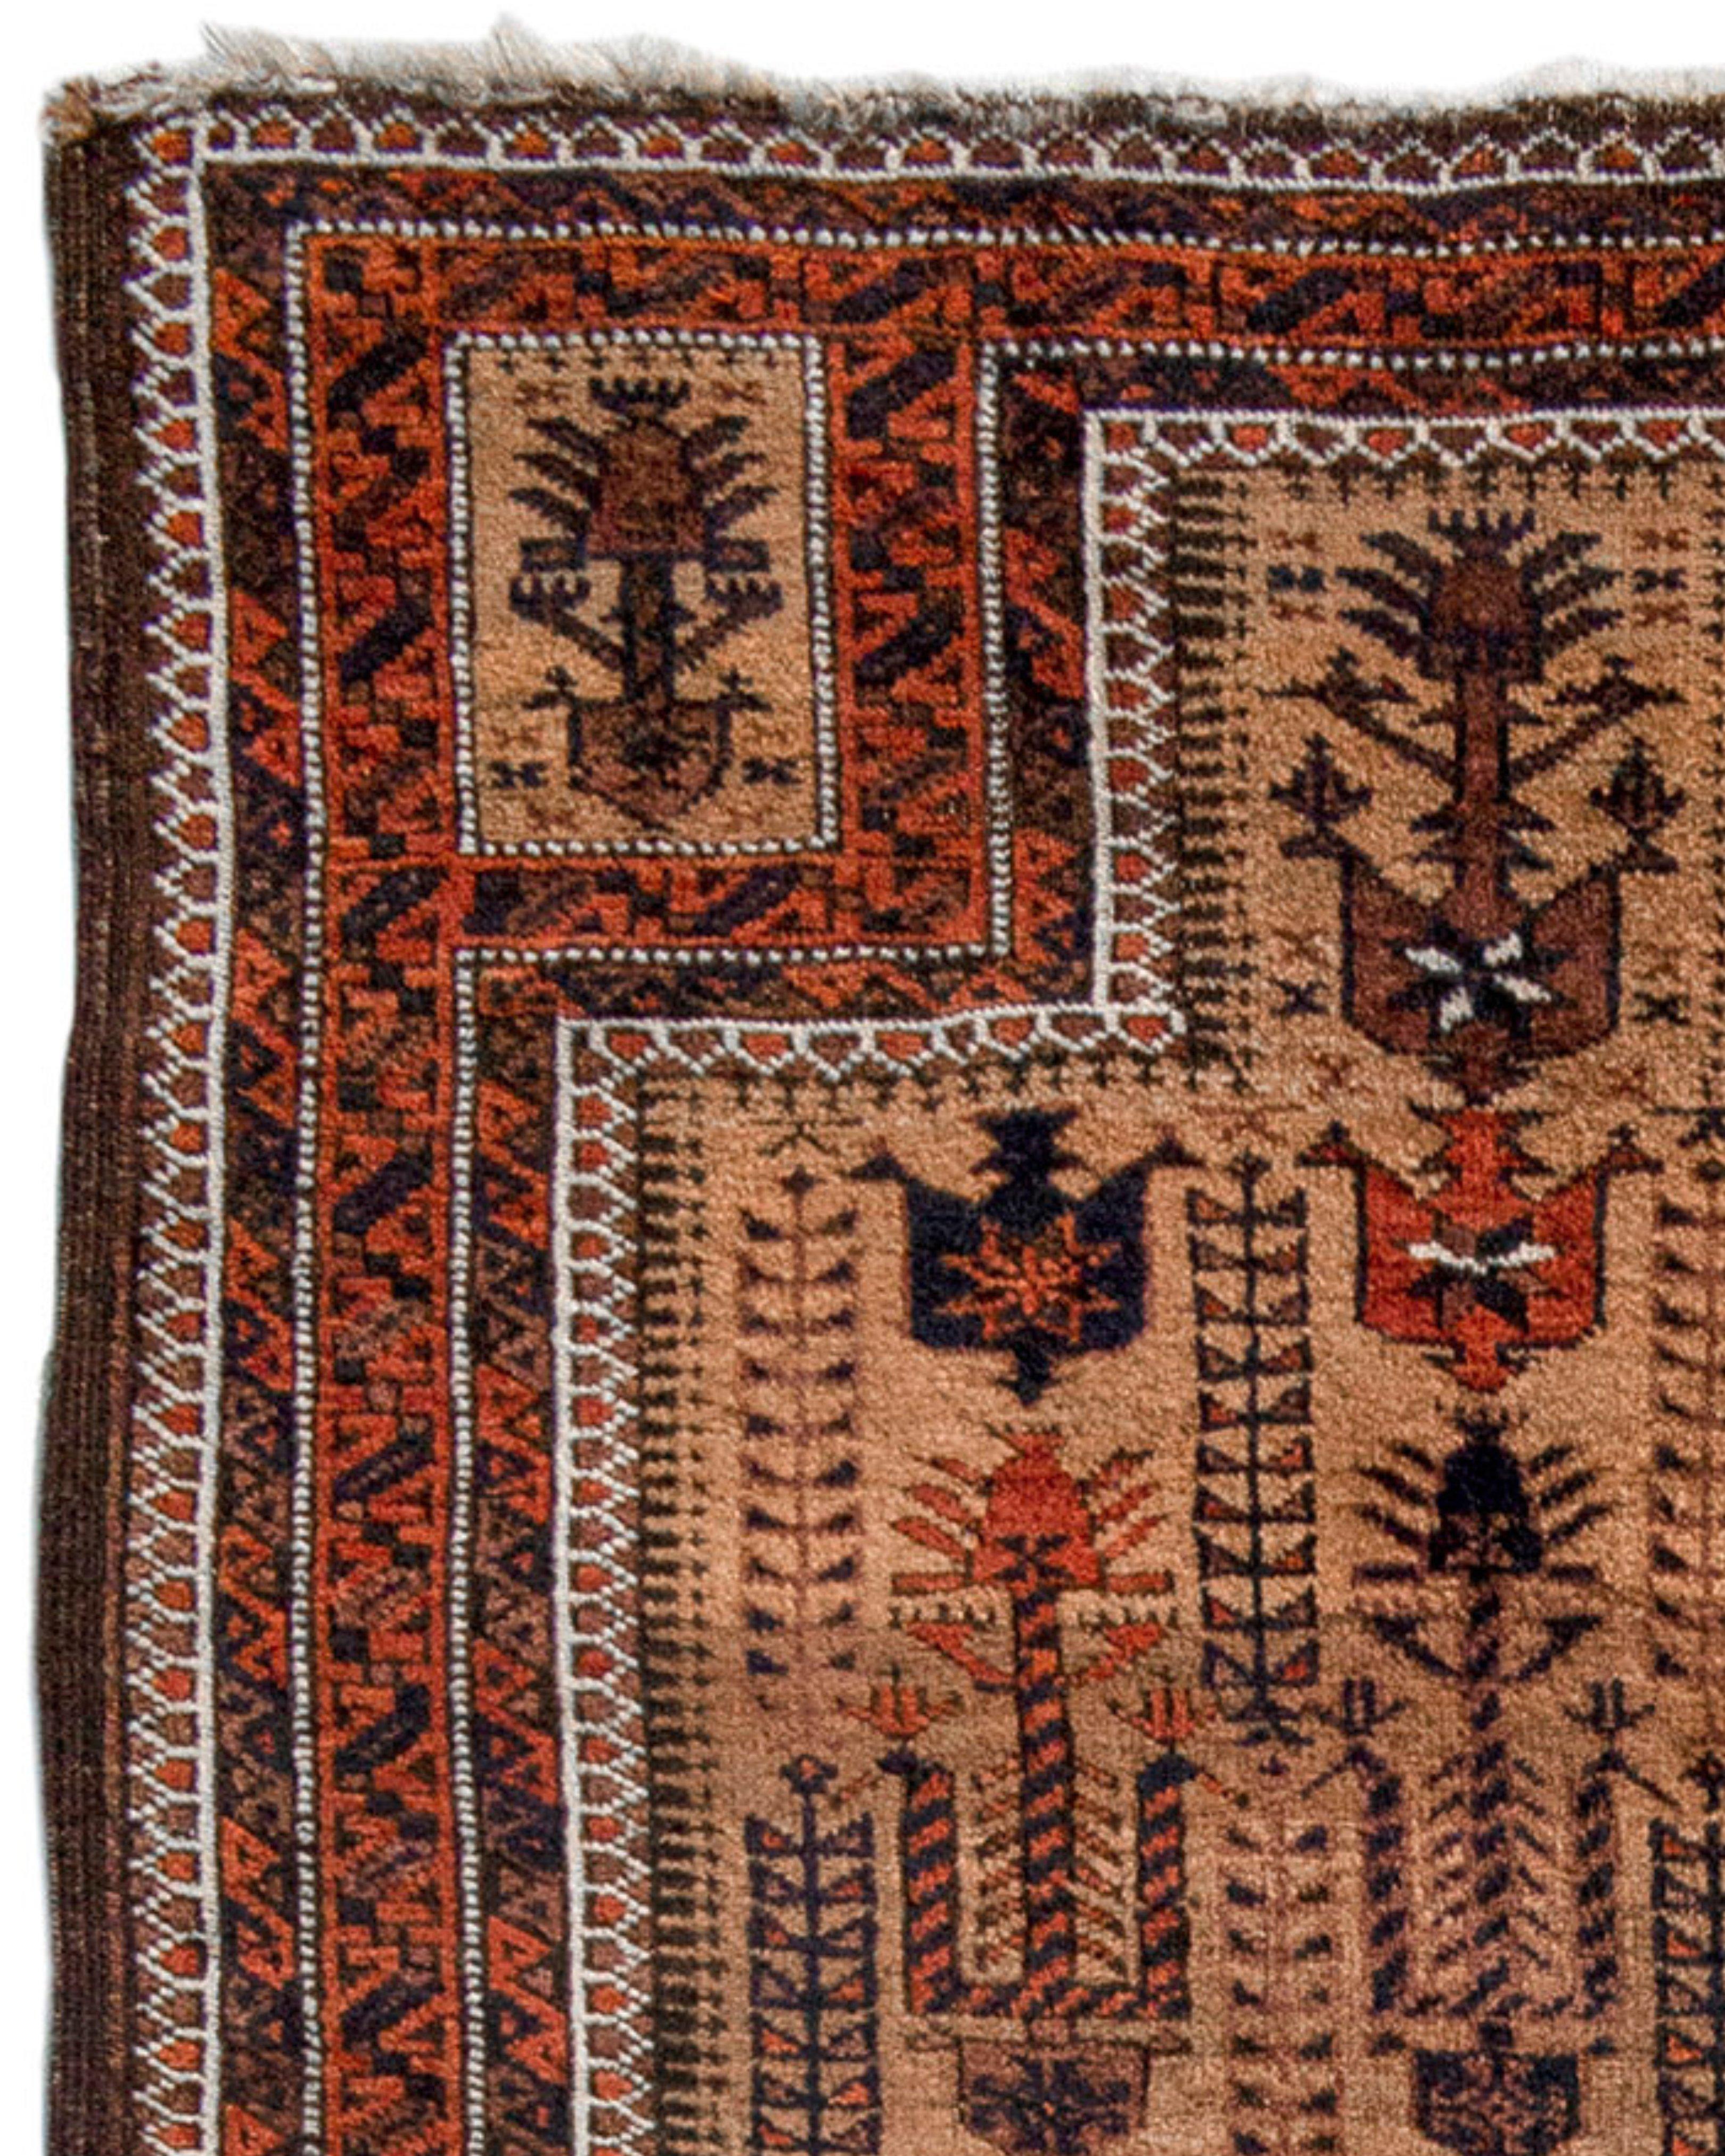 Hand-Knotted Baluch Prayer Rug, c. 1900 For Sale